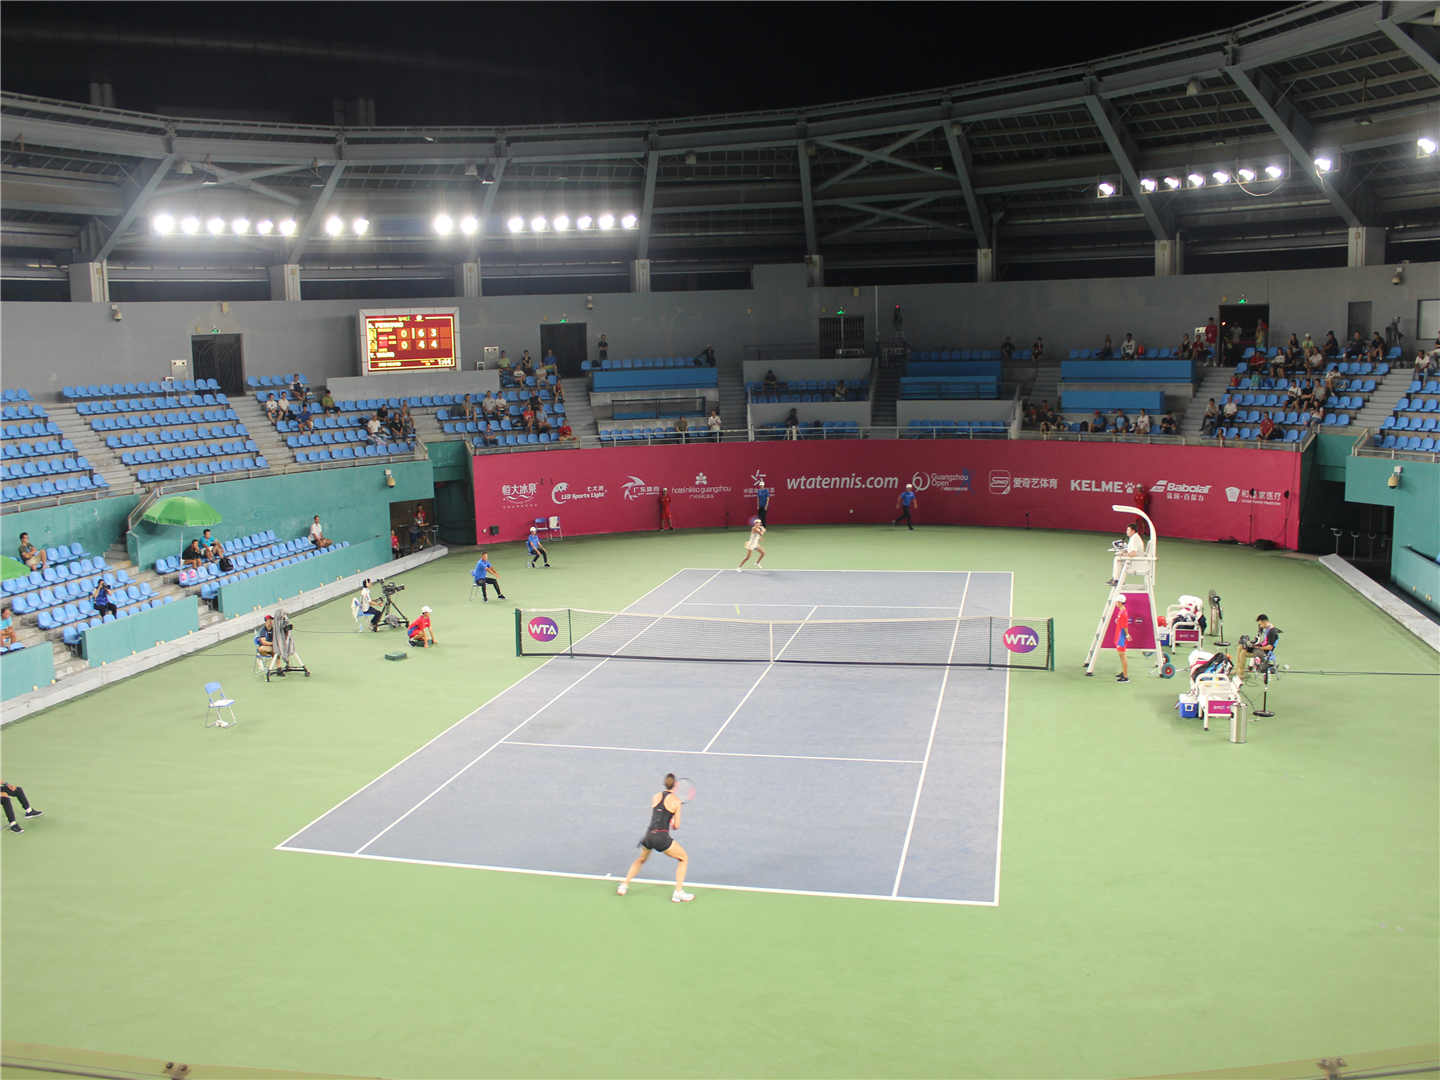 Guangdong Olympic Tennis Center